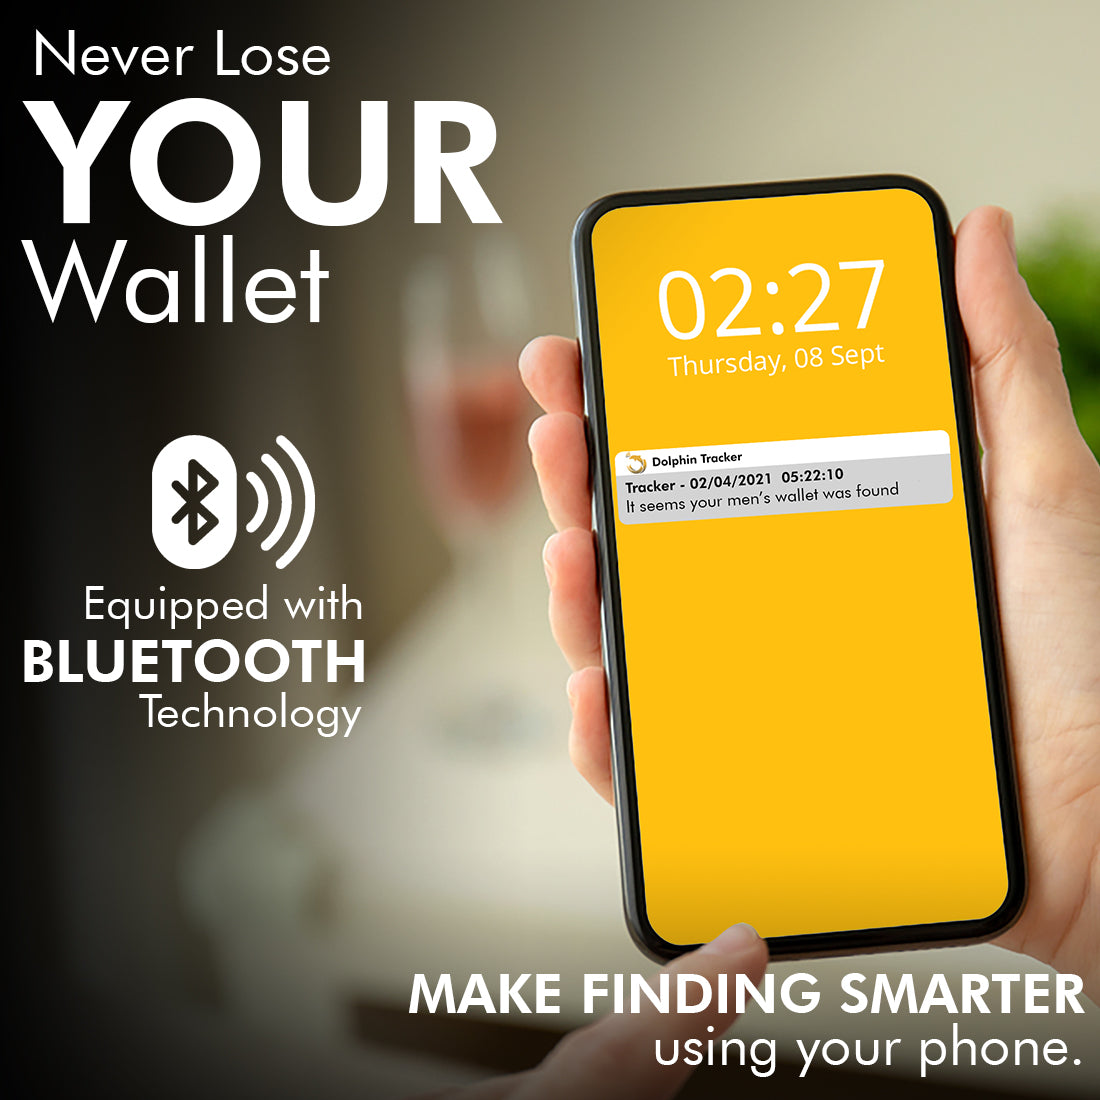 tag8-never-lose-your-wallet-with-BLE-technology